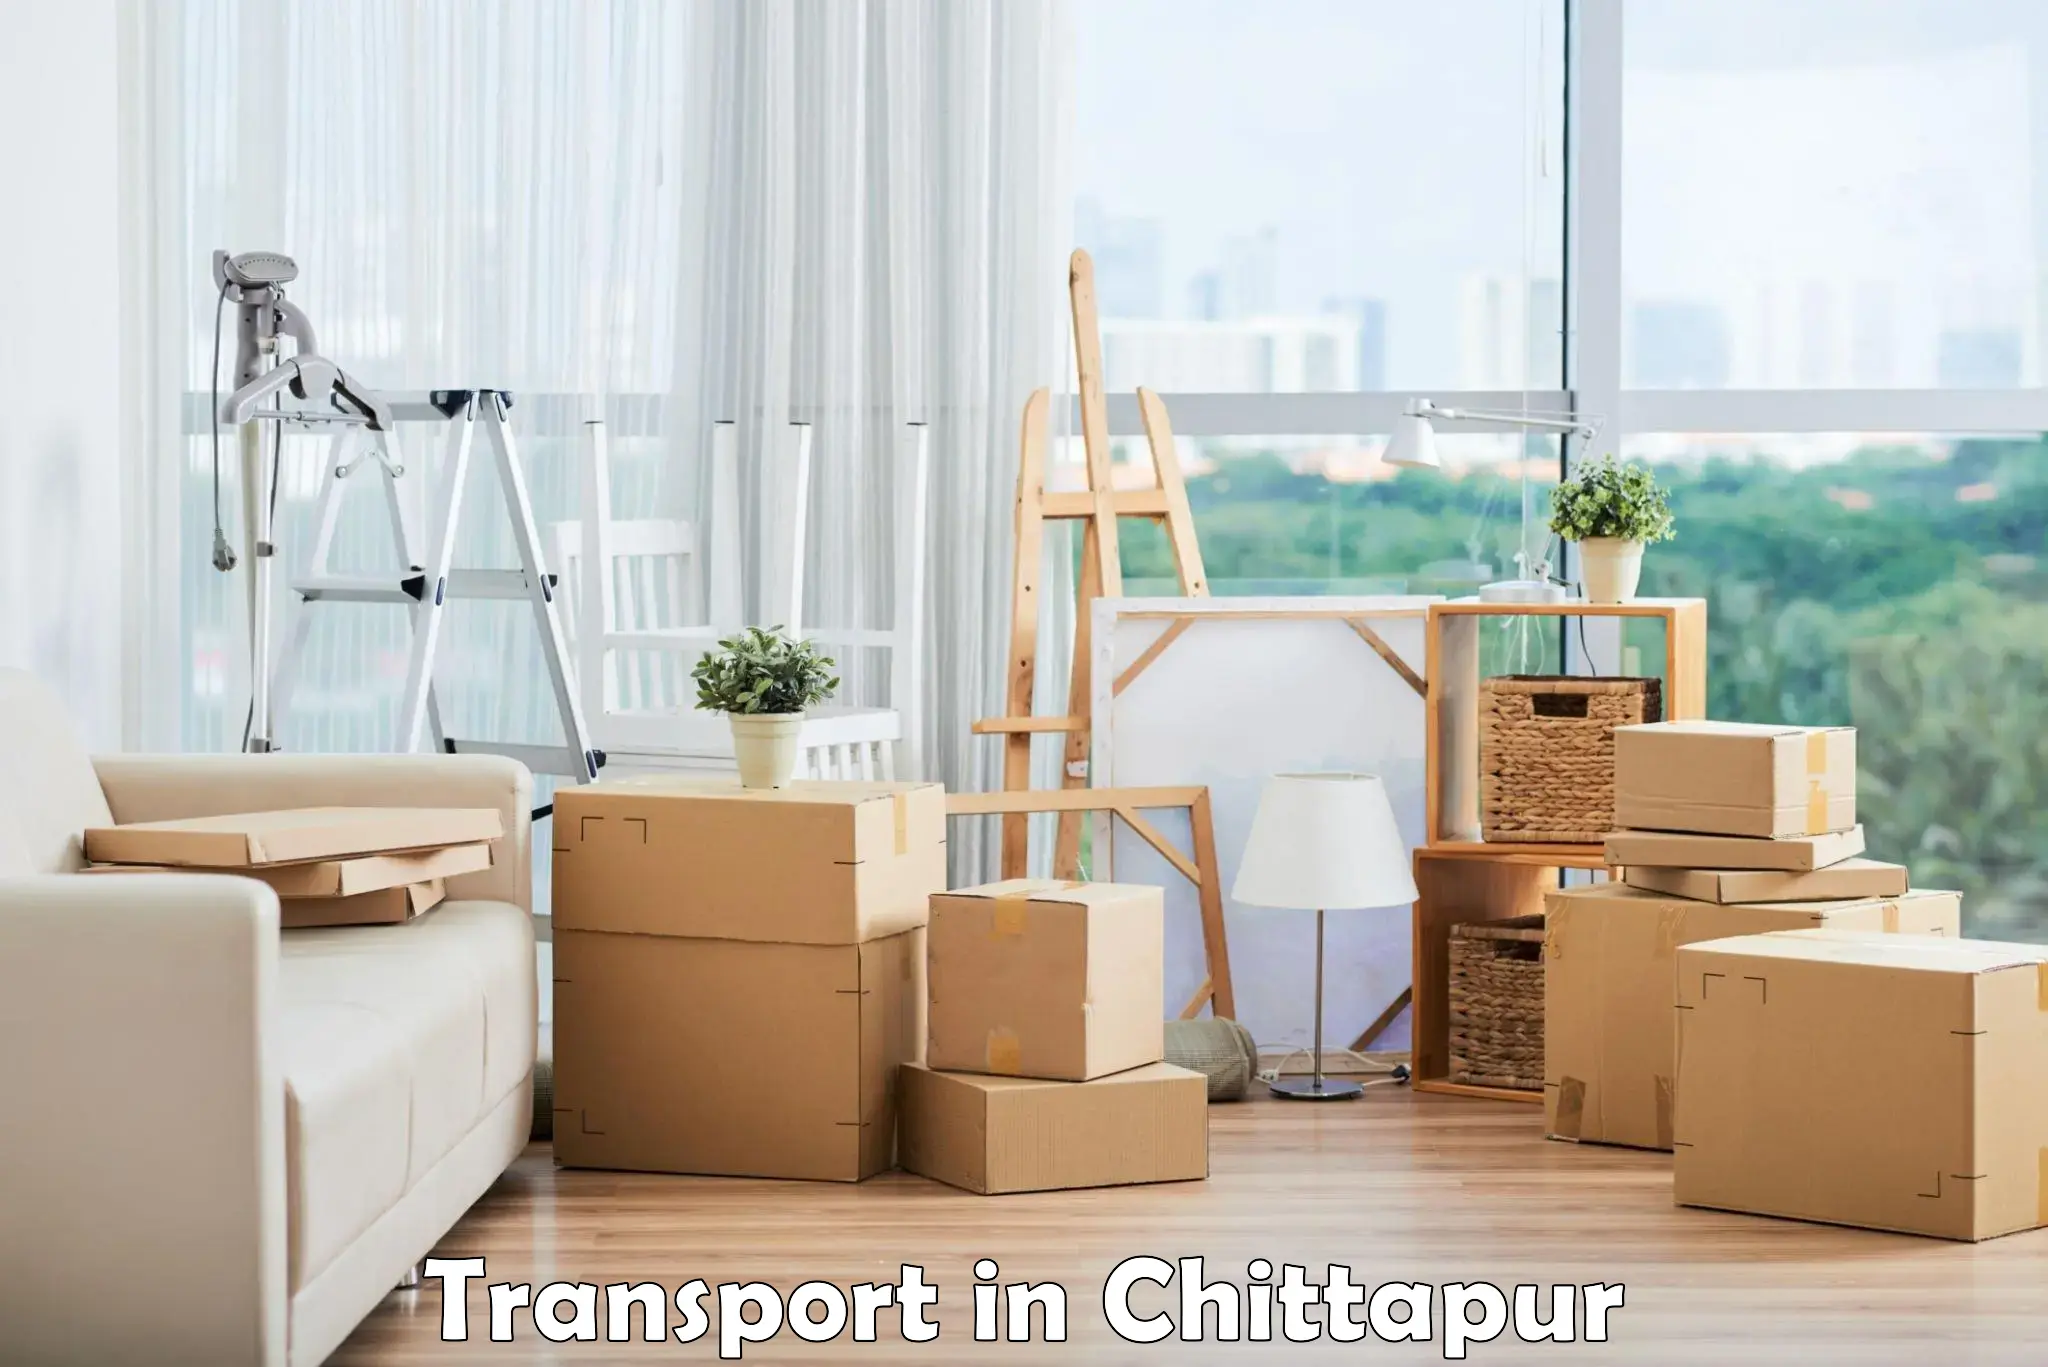 Land transport services in Chittapur